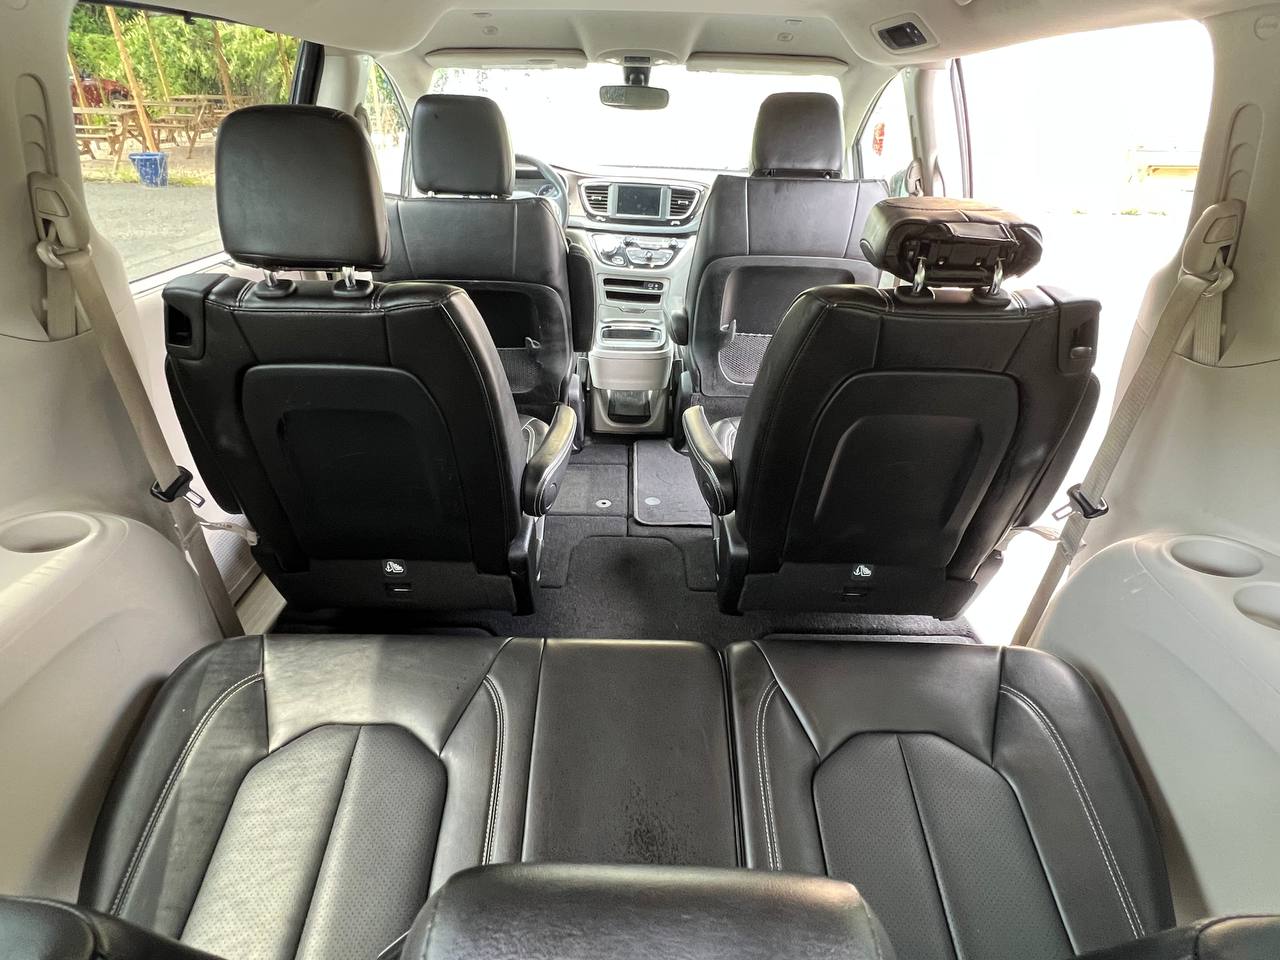 Used - Chrysler Voyager LXi Minivan for sale in Staten Island NY